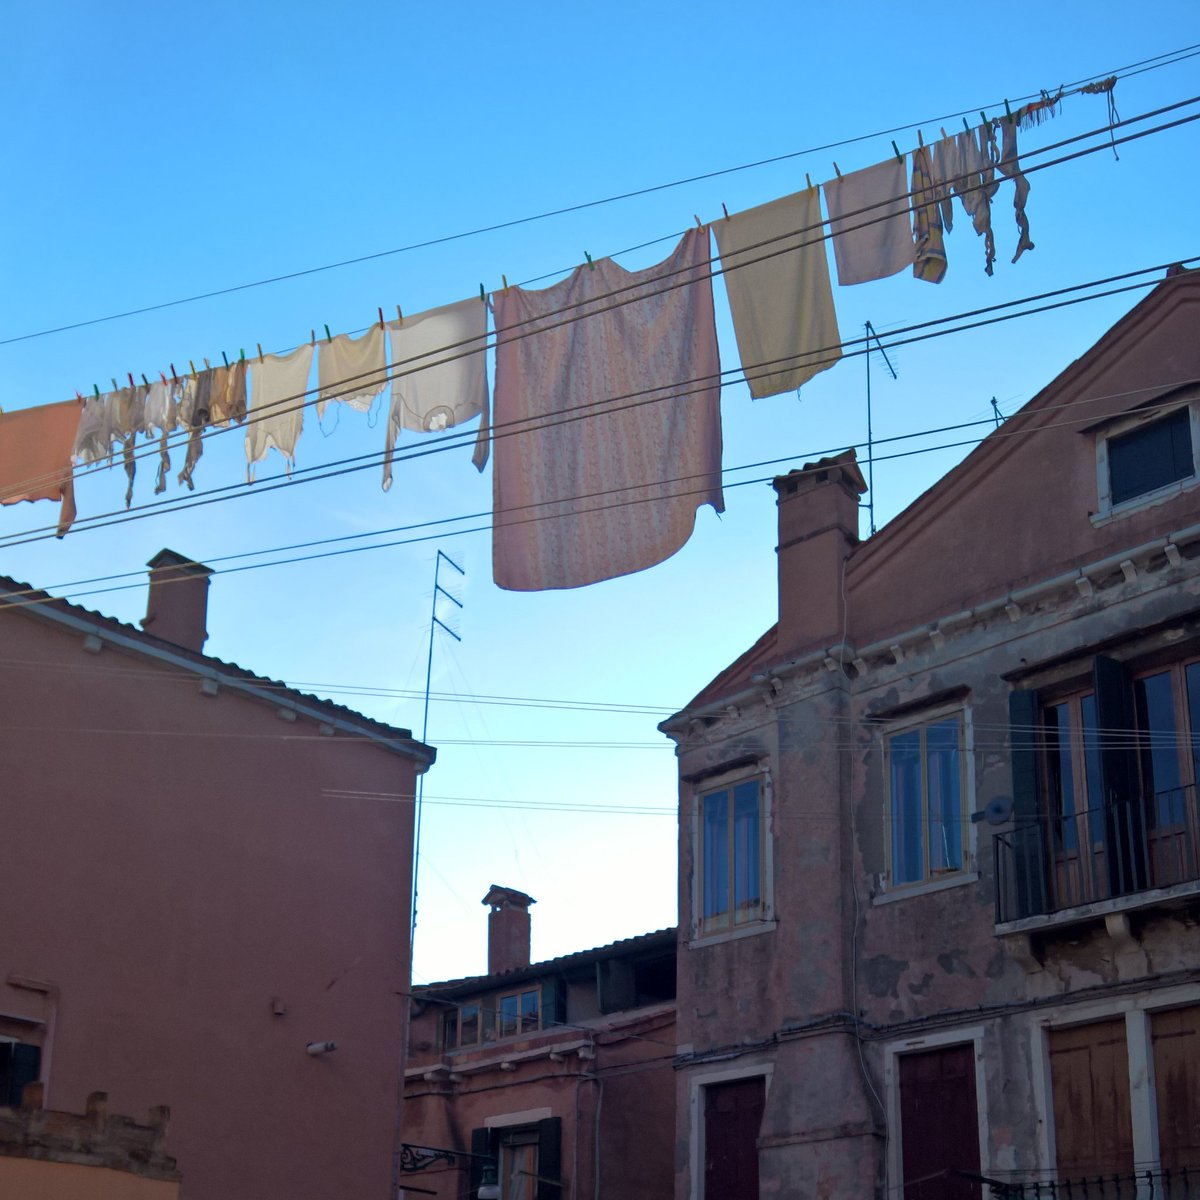 Matching your  #washing to your  #building.  #Castello  #Venezia  #Venice